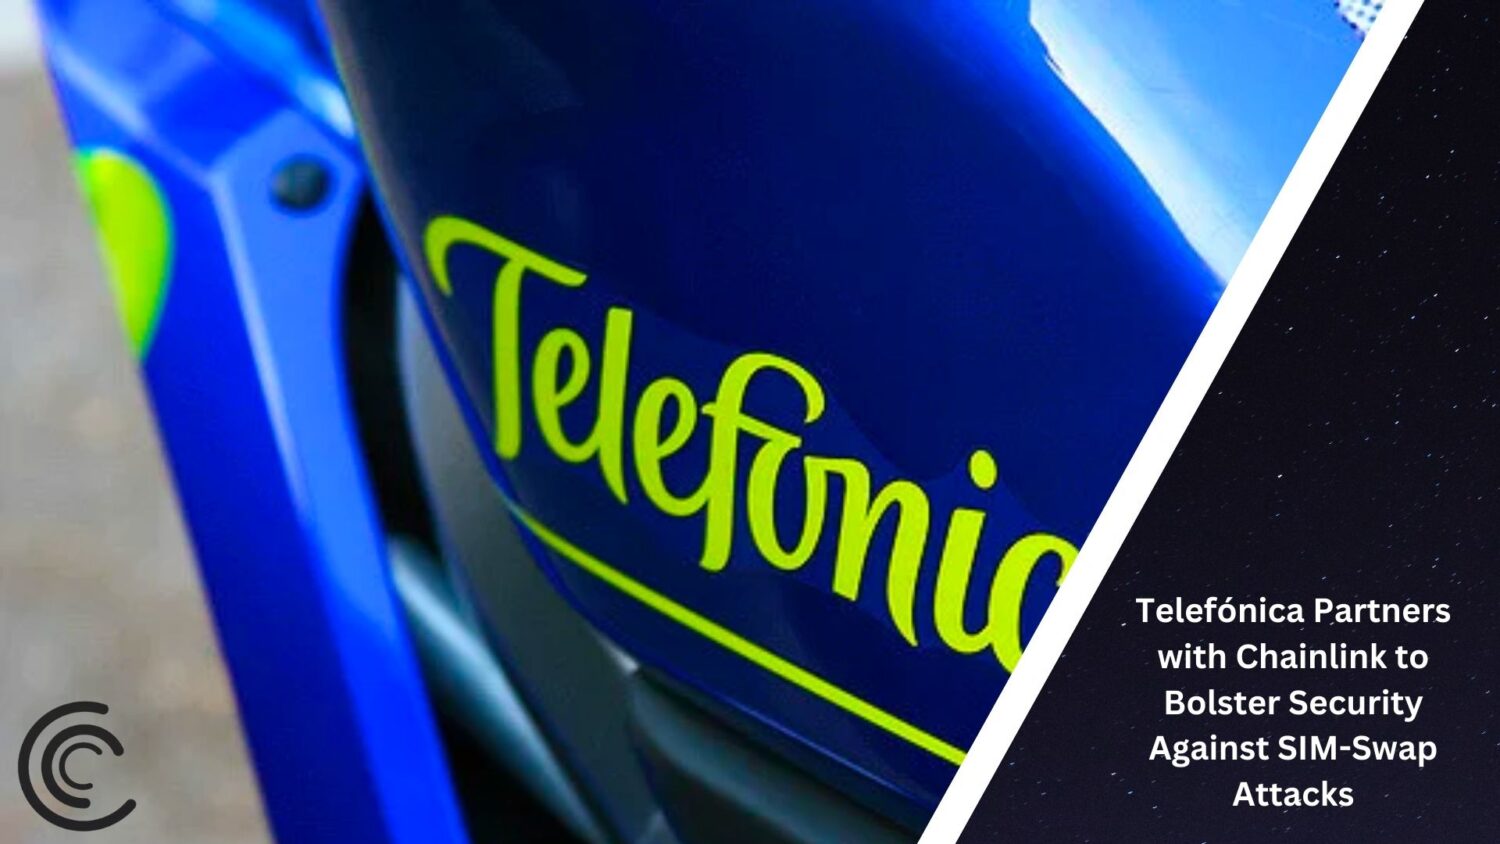 Telefónica Partners With Chainlink To Bolster Security Against Sim-Swap Attacks